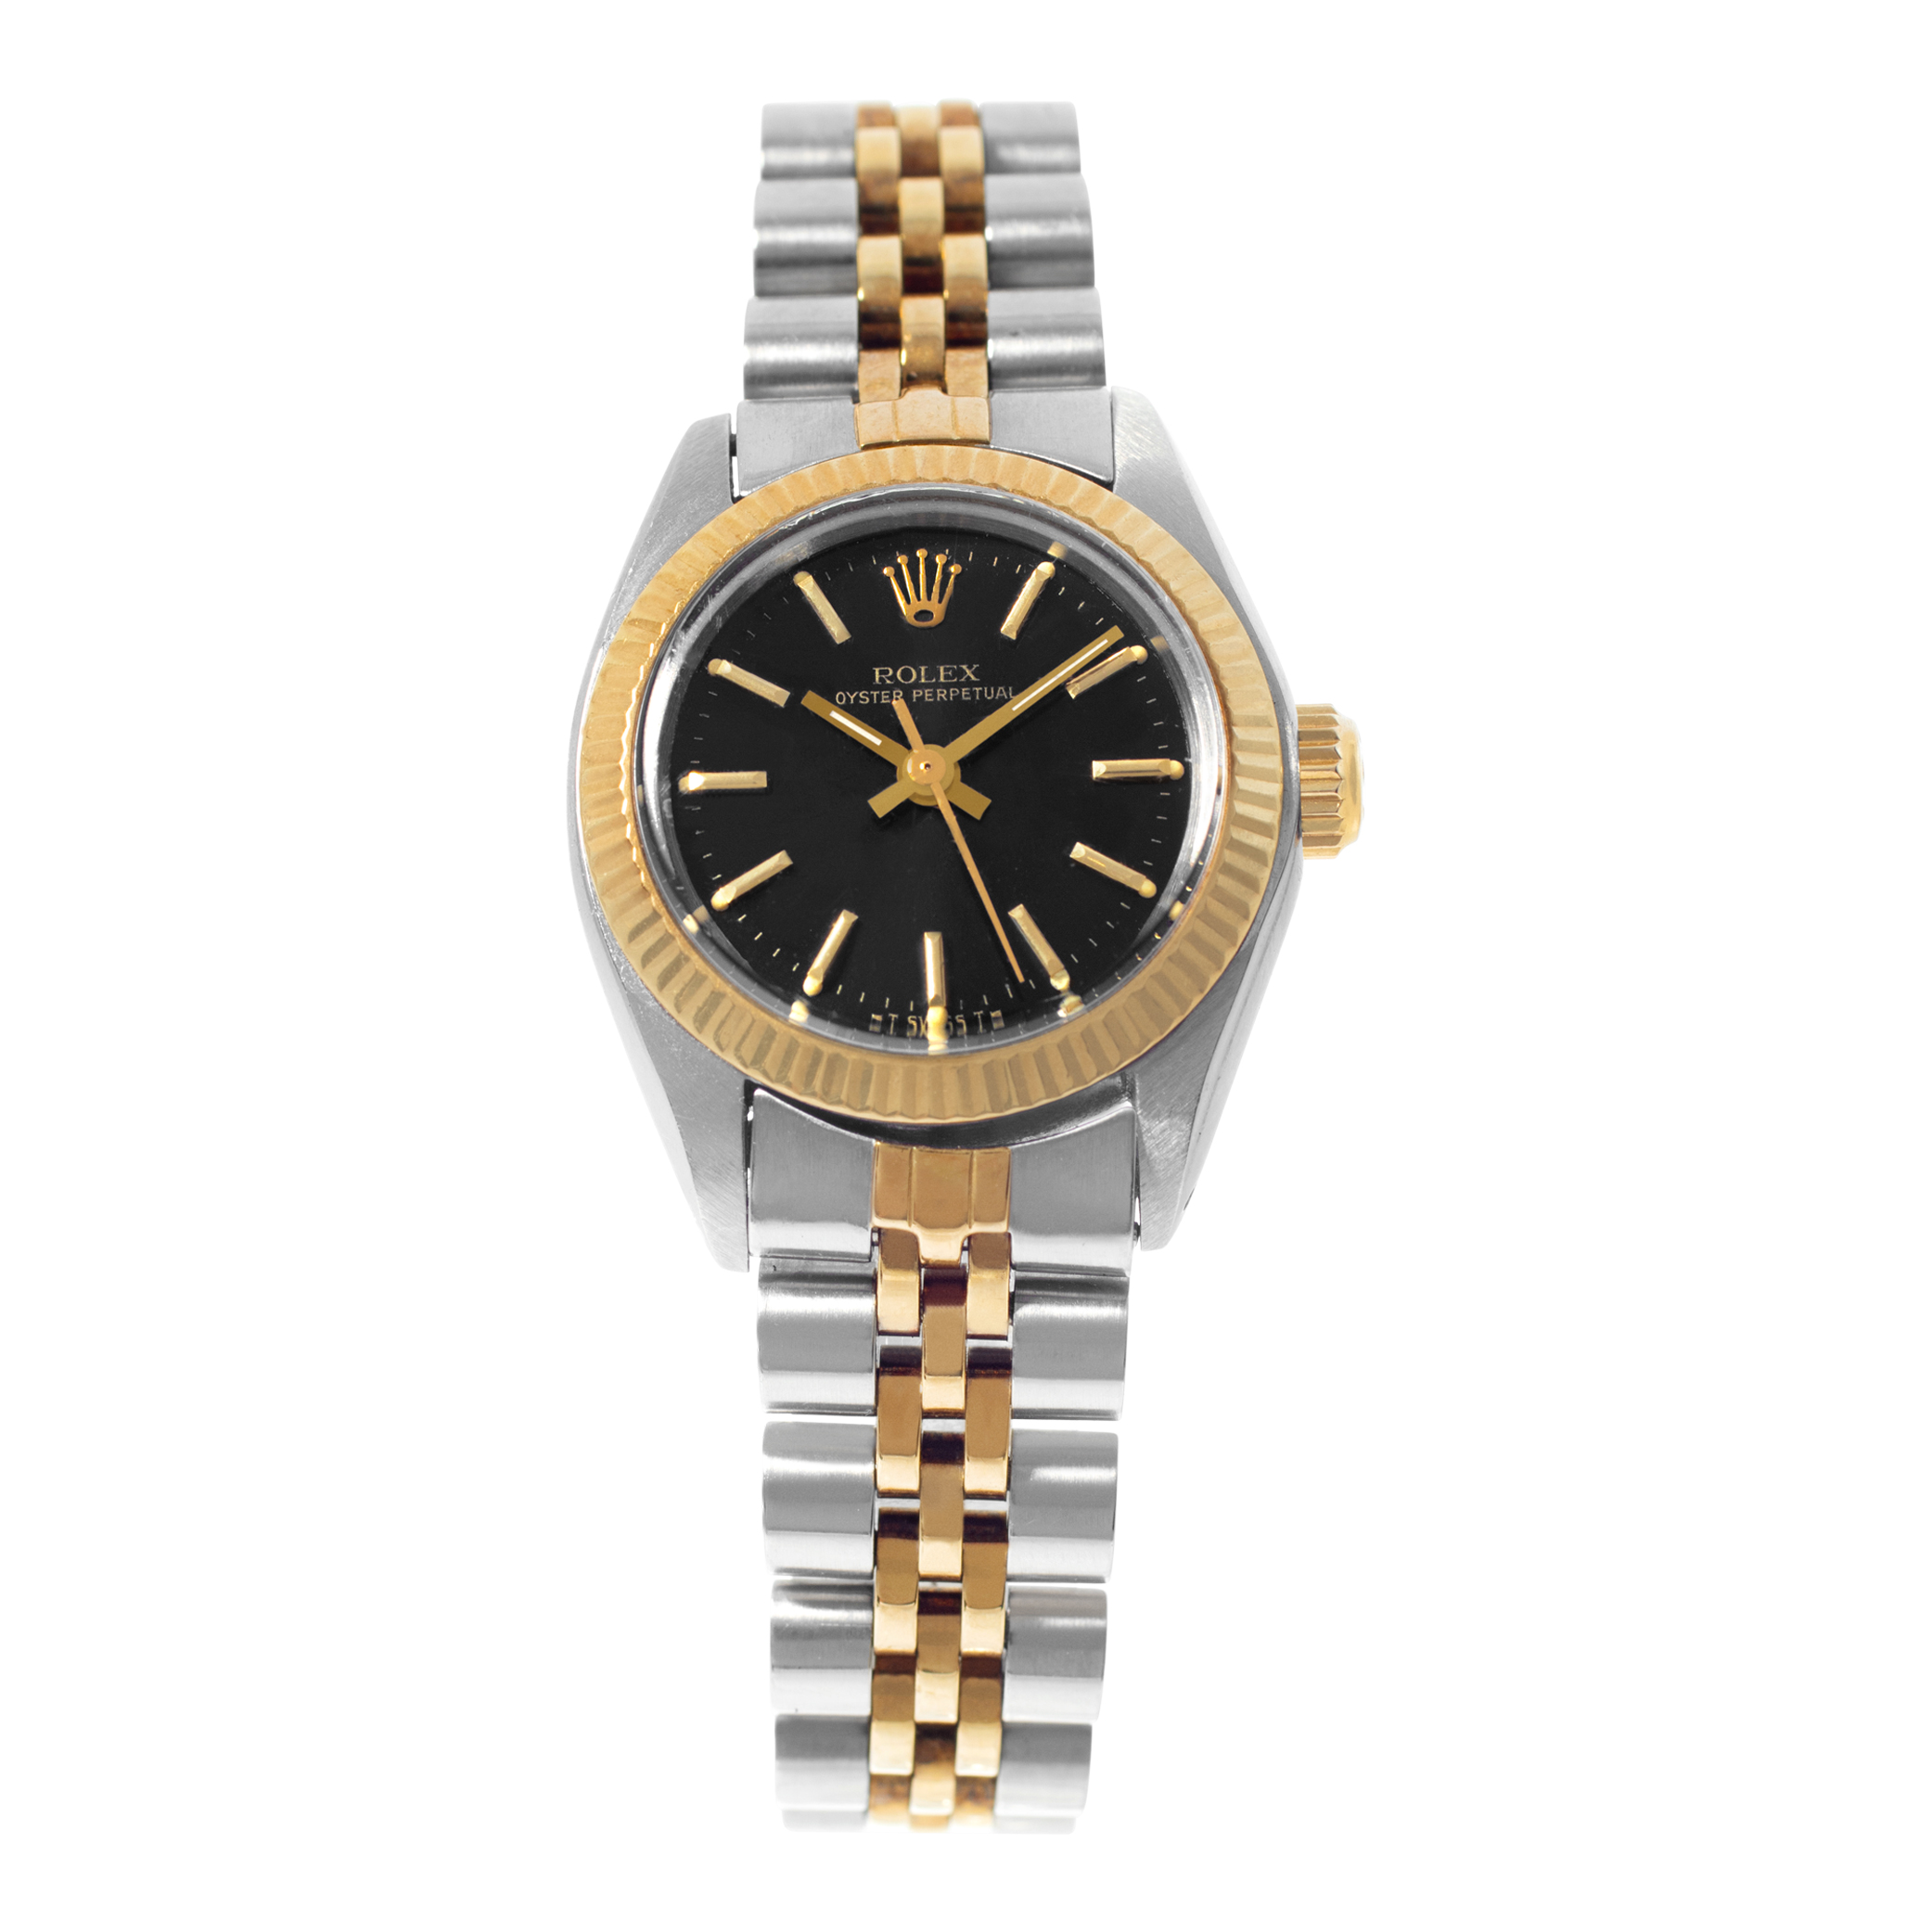 Rolex Oyster Perpetual 26mm 6719